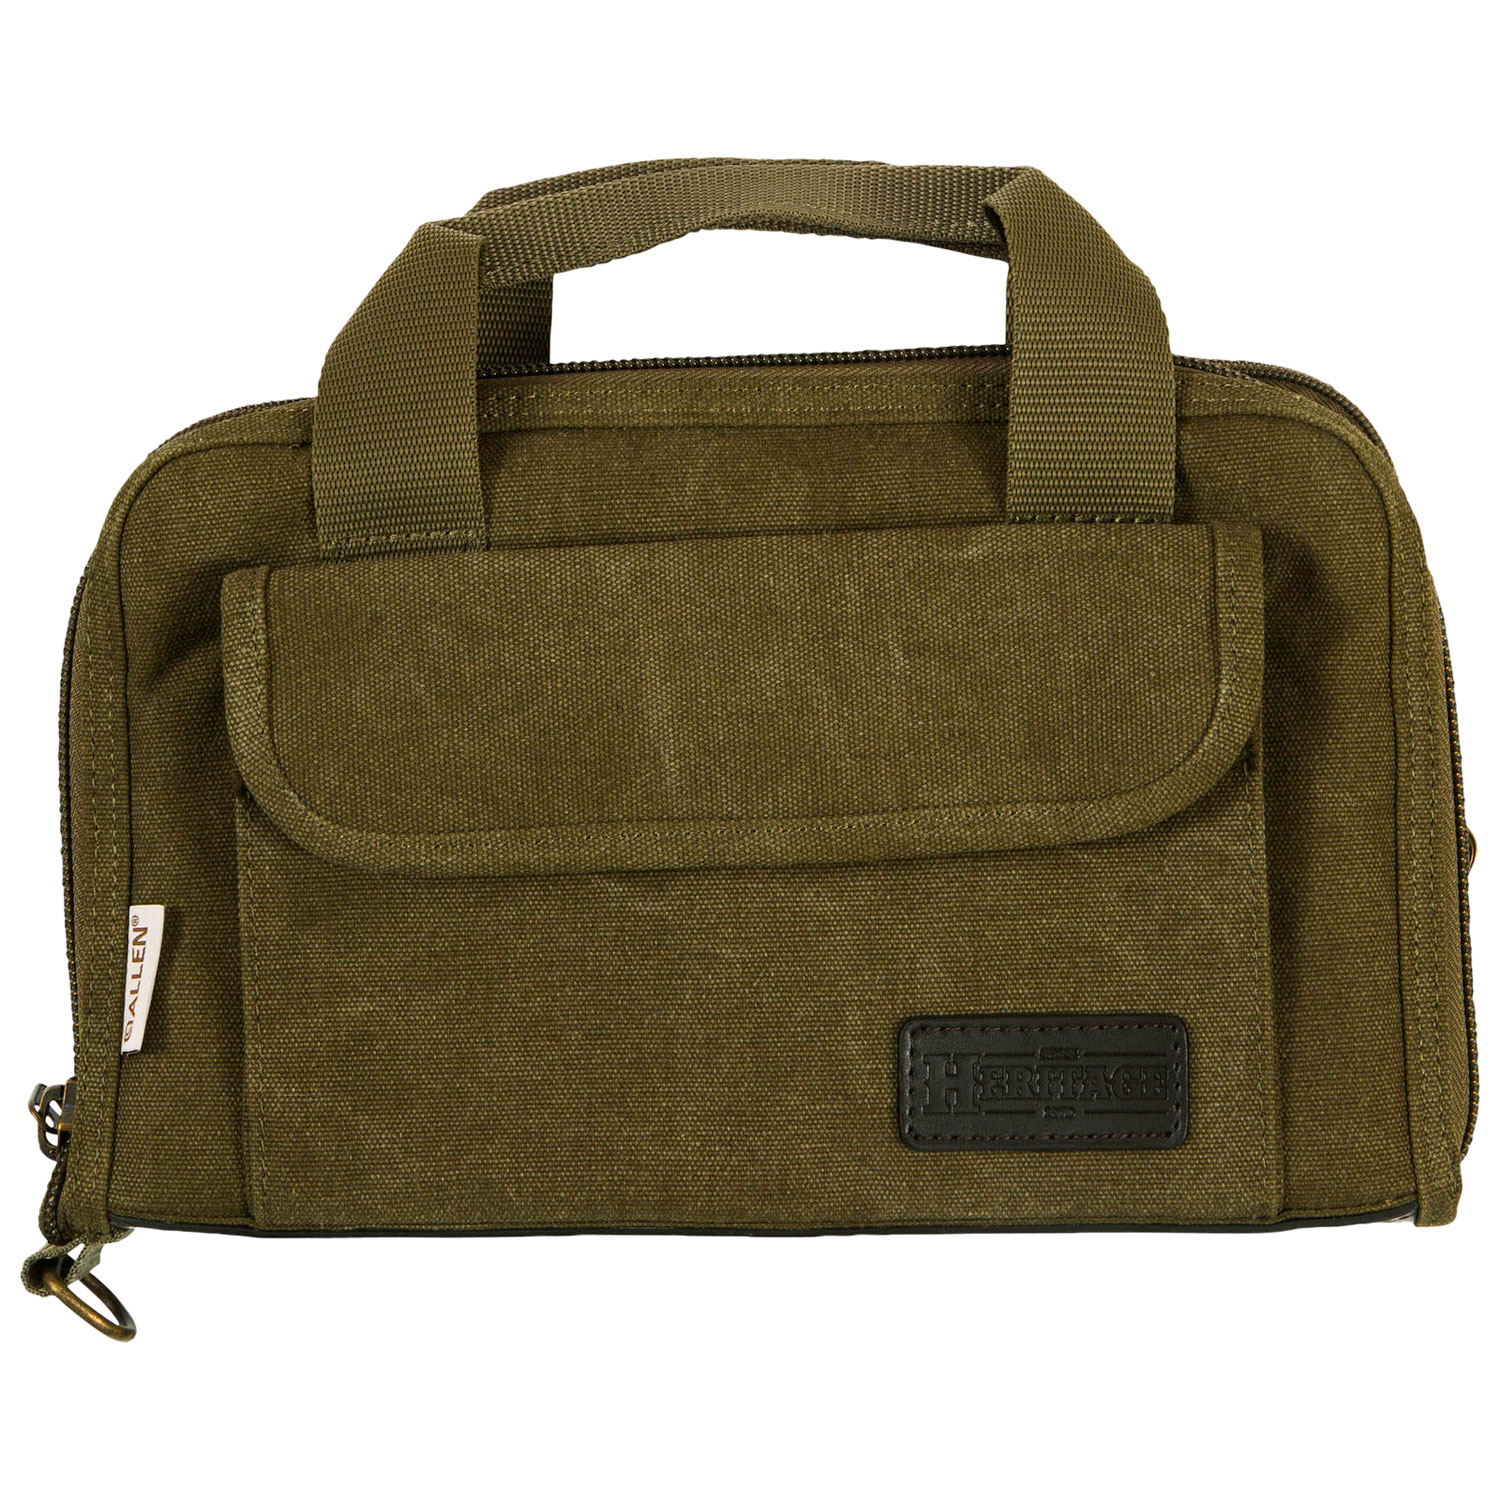 Heritage Cases 8245 Select Attache made of Canvas with Olive Finish, Lockable Zippers, Mag Slots & Pleated Front Flap for 2 Handguns 12